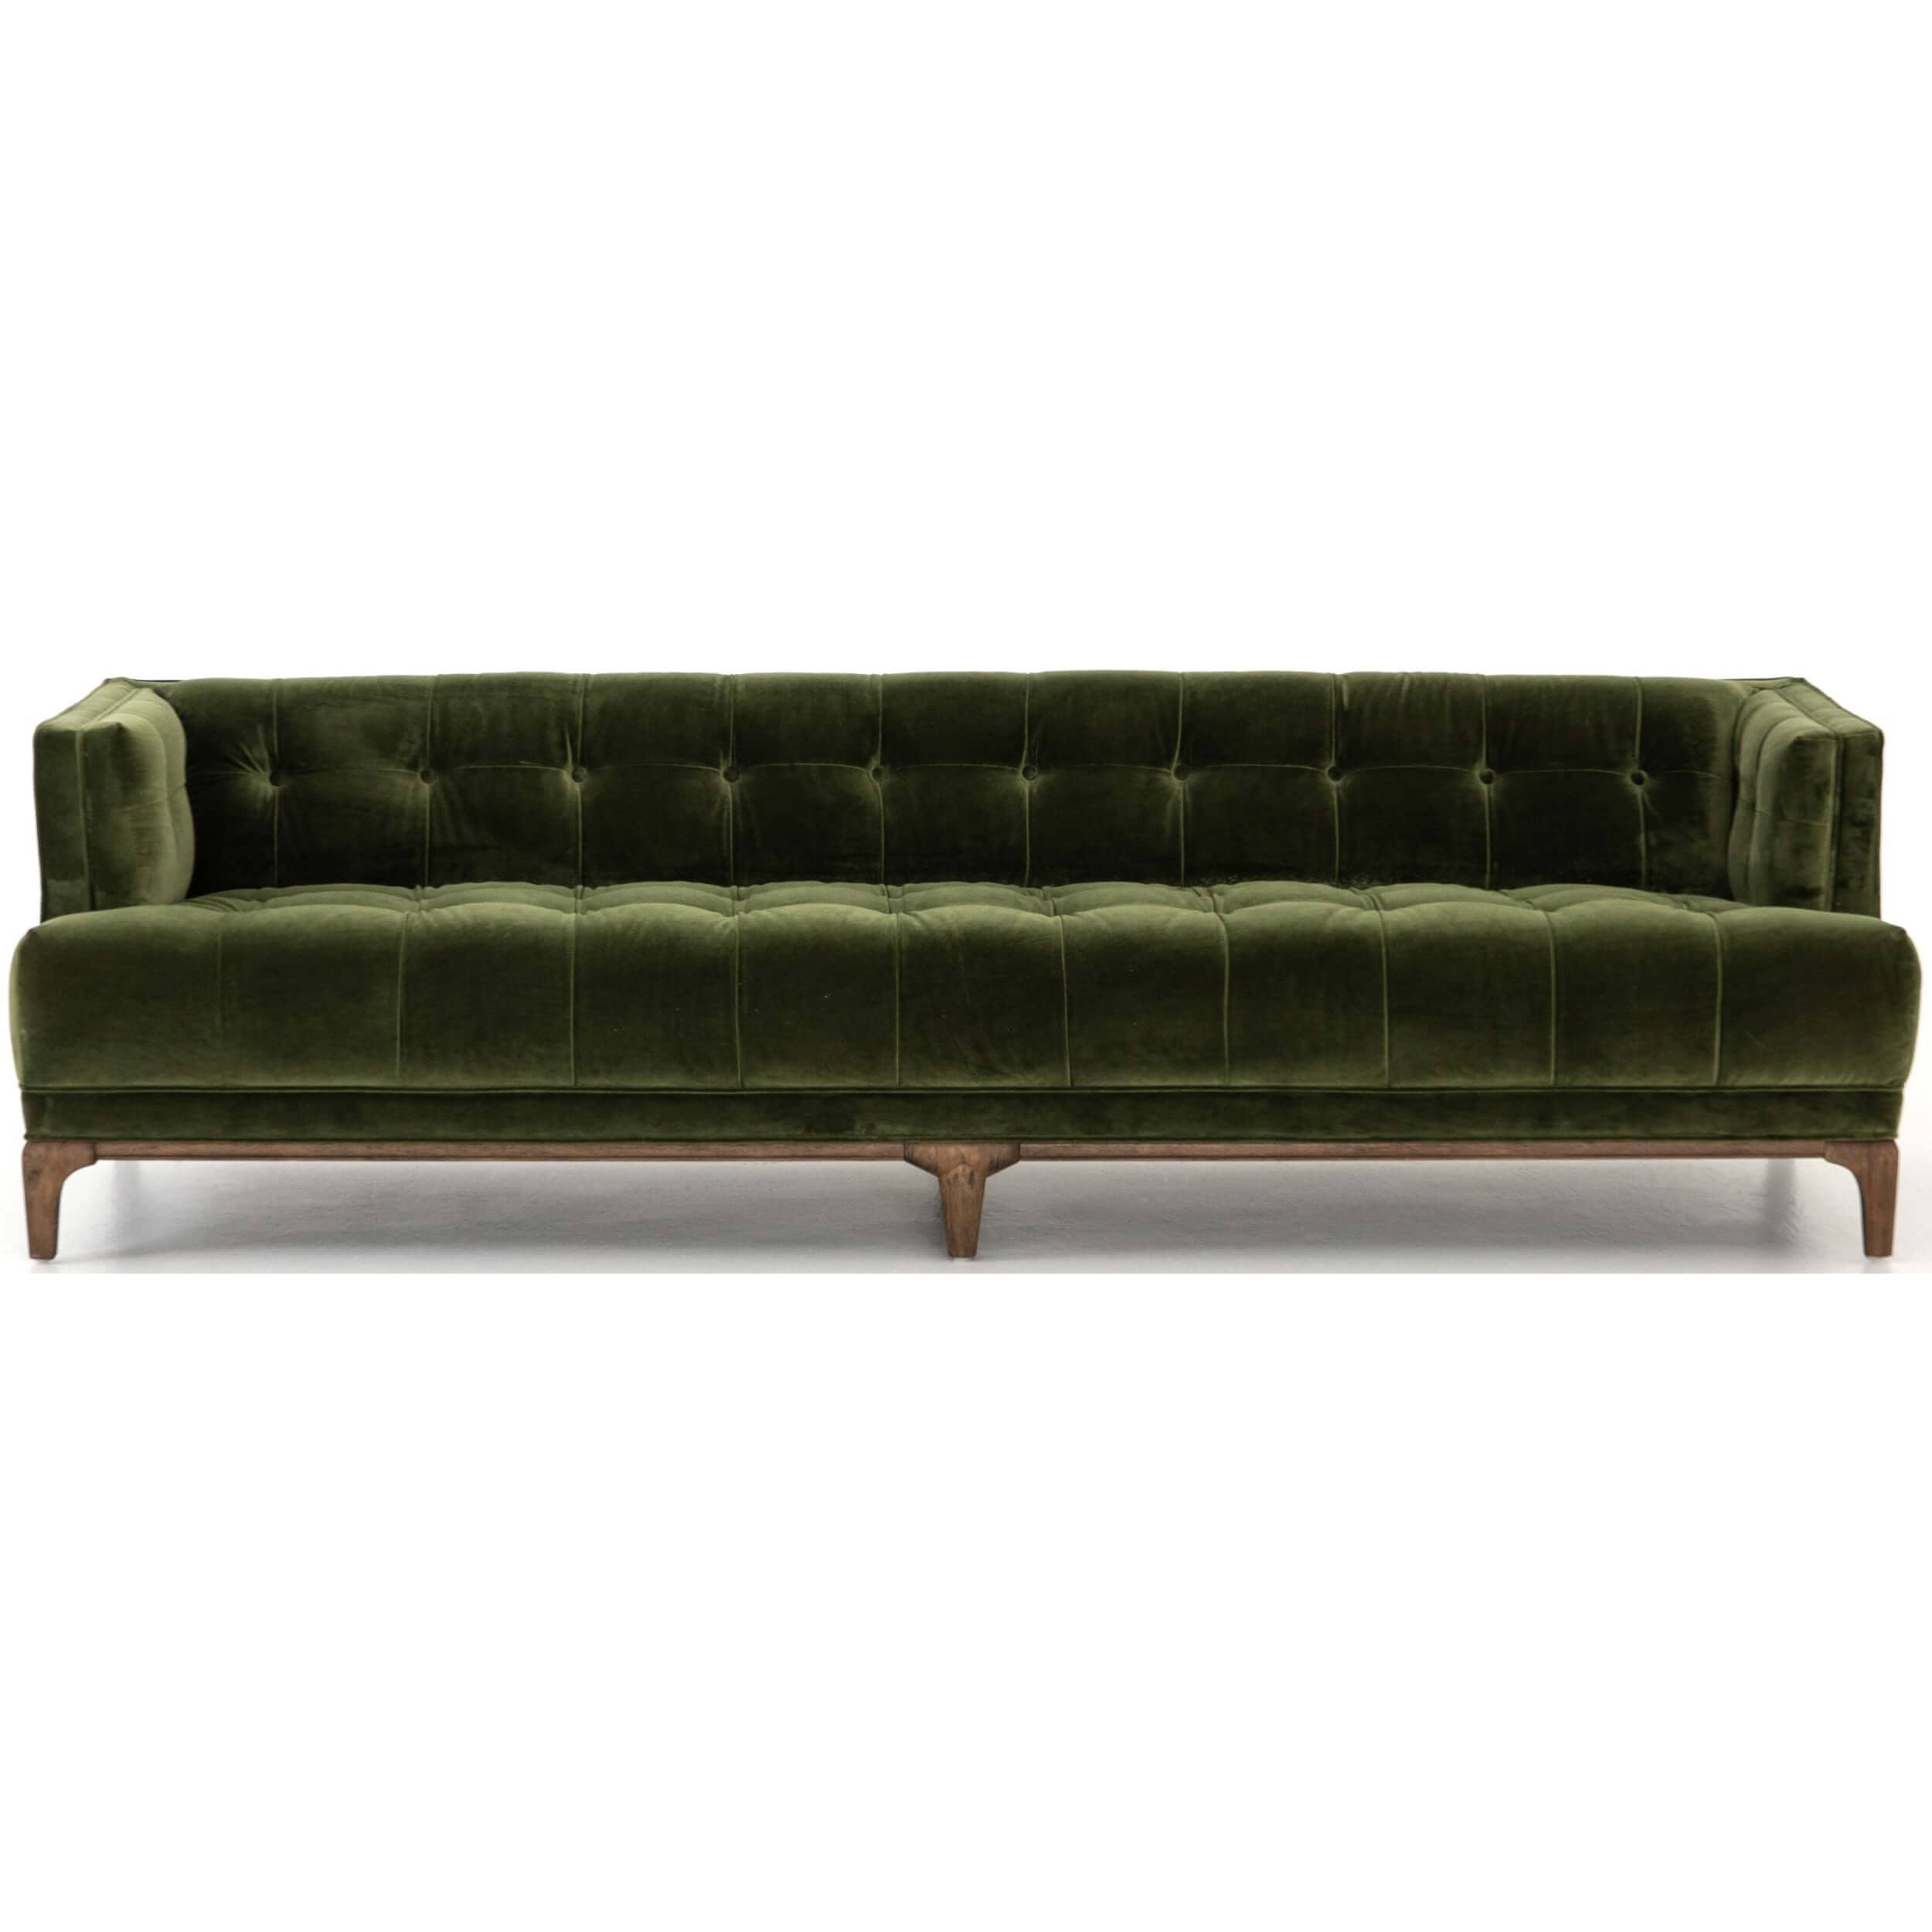 Image of Dylan Sofa, Sapphire Olive